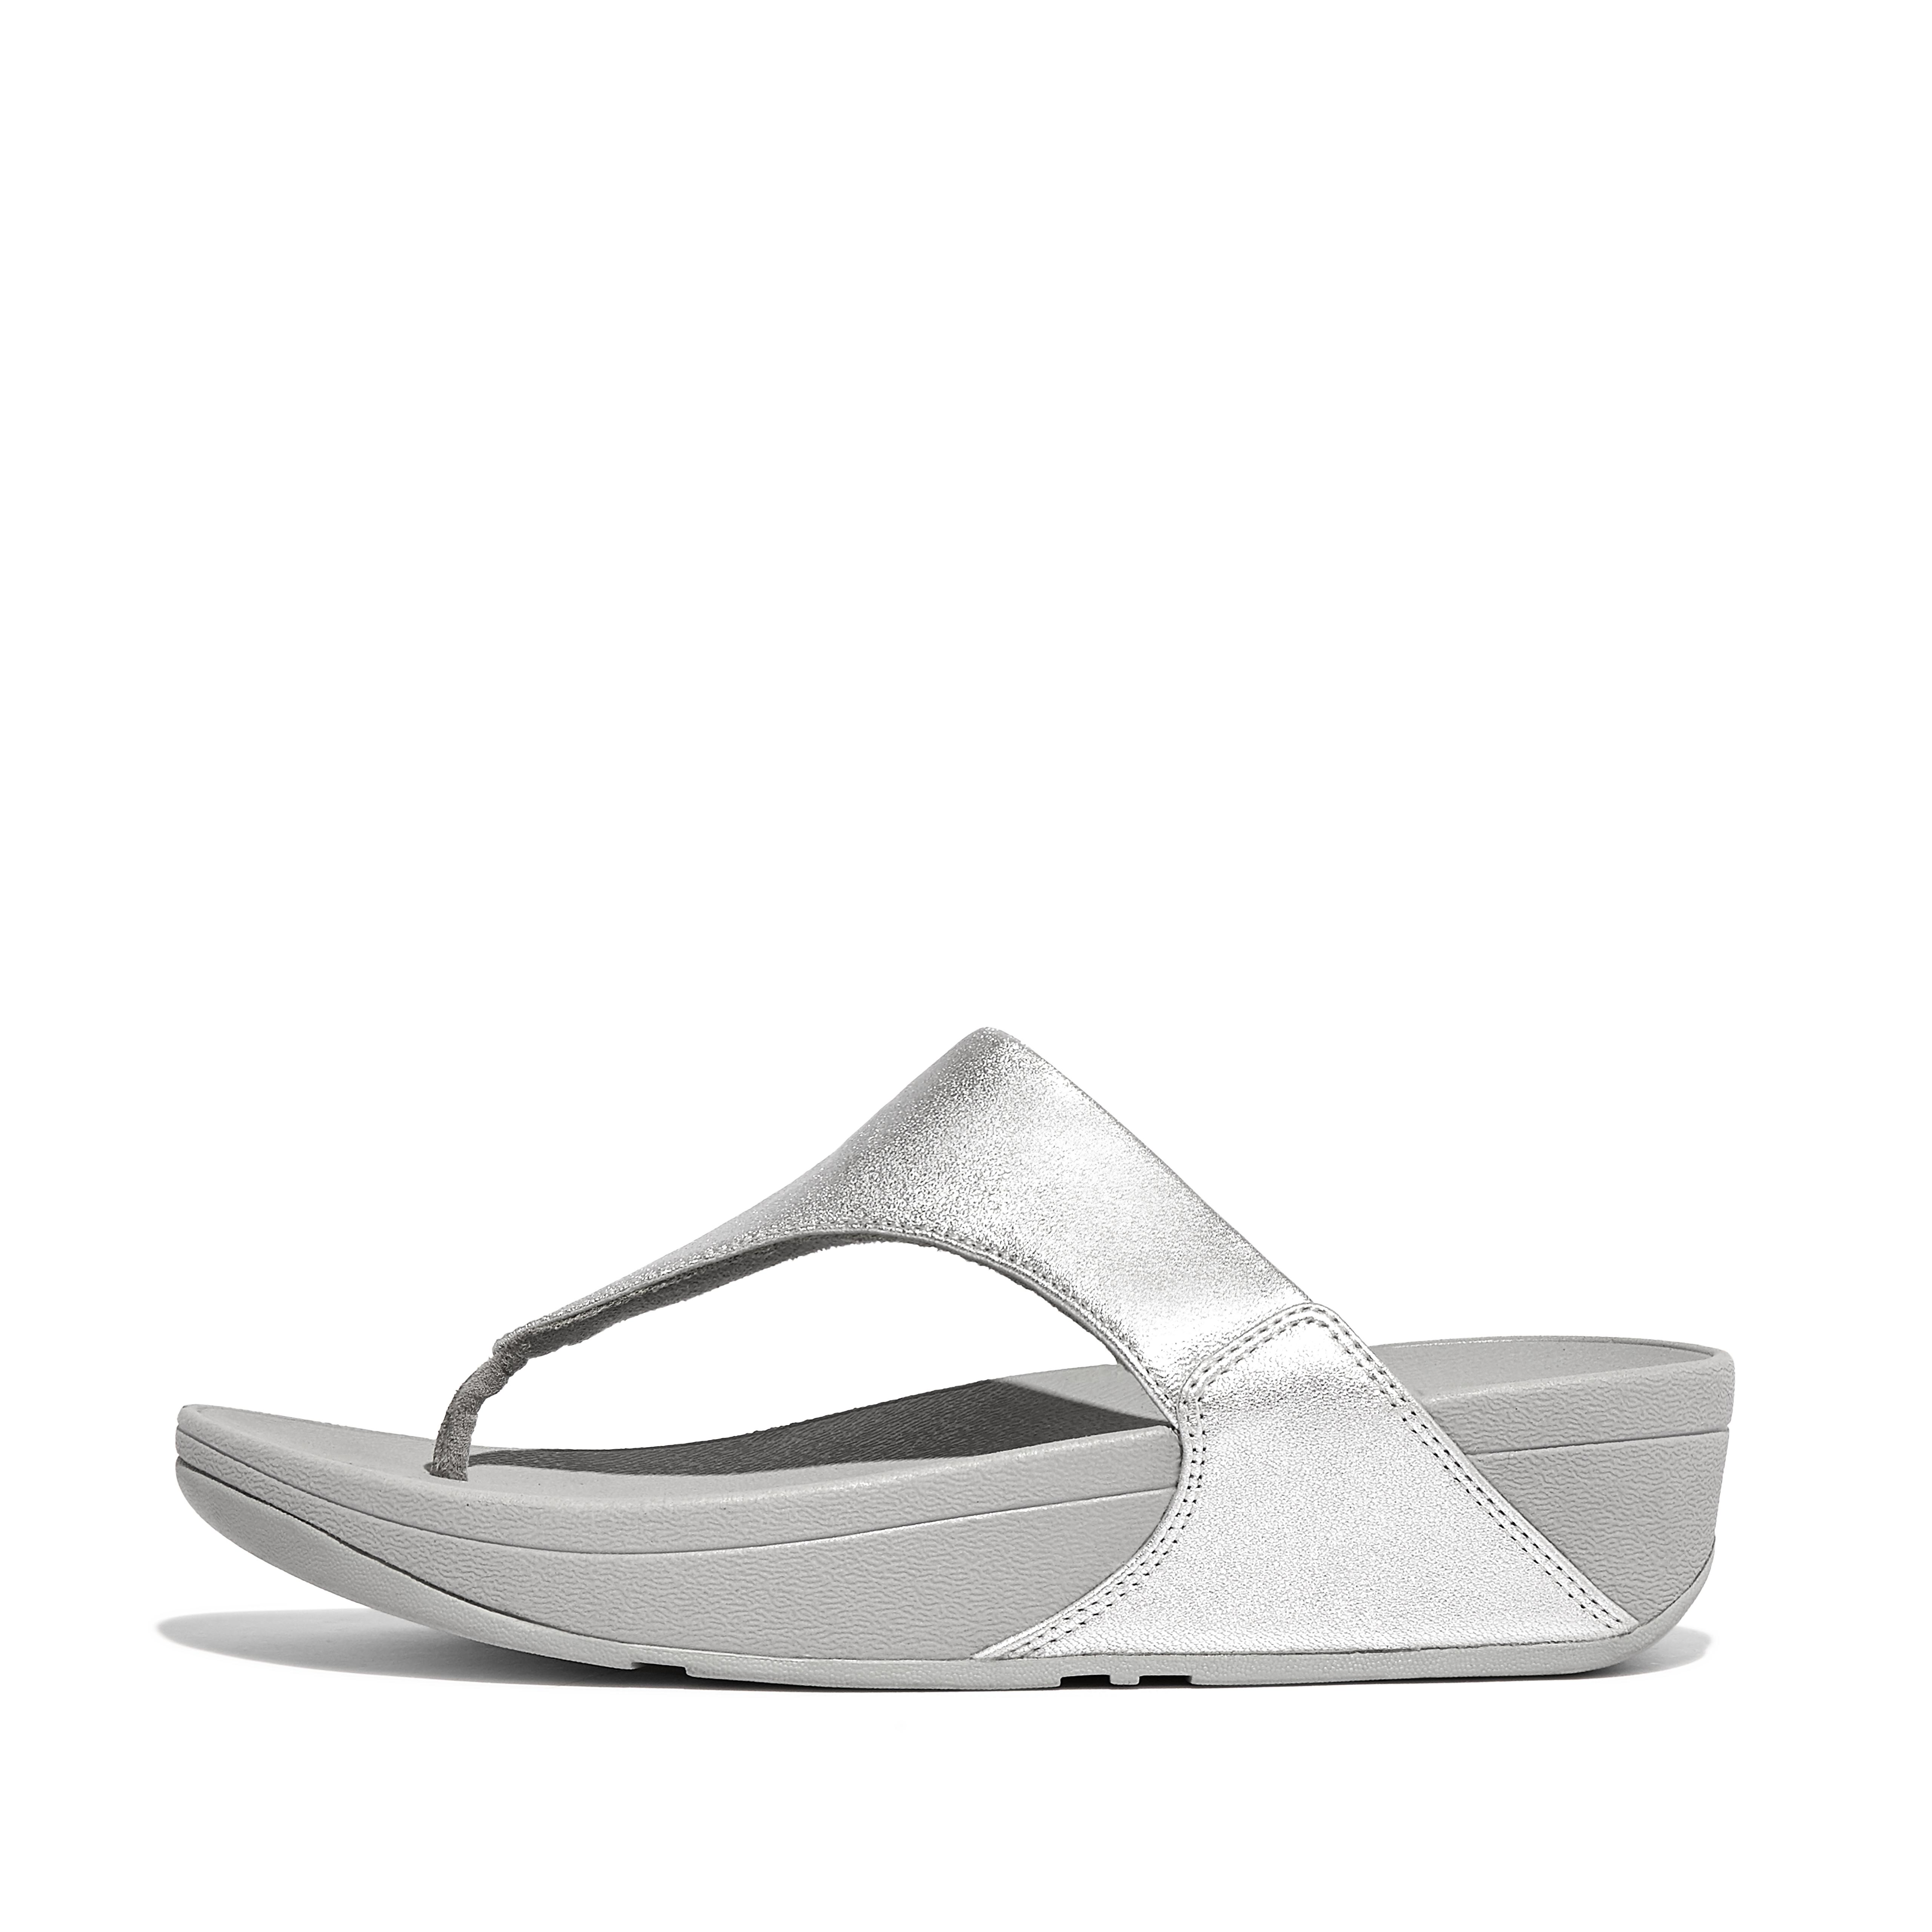 Fitflop Leather Toe-Post Sandals